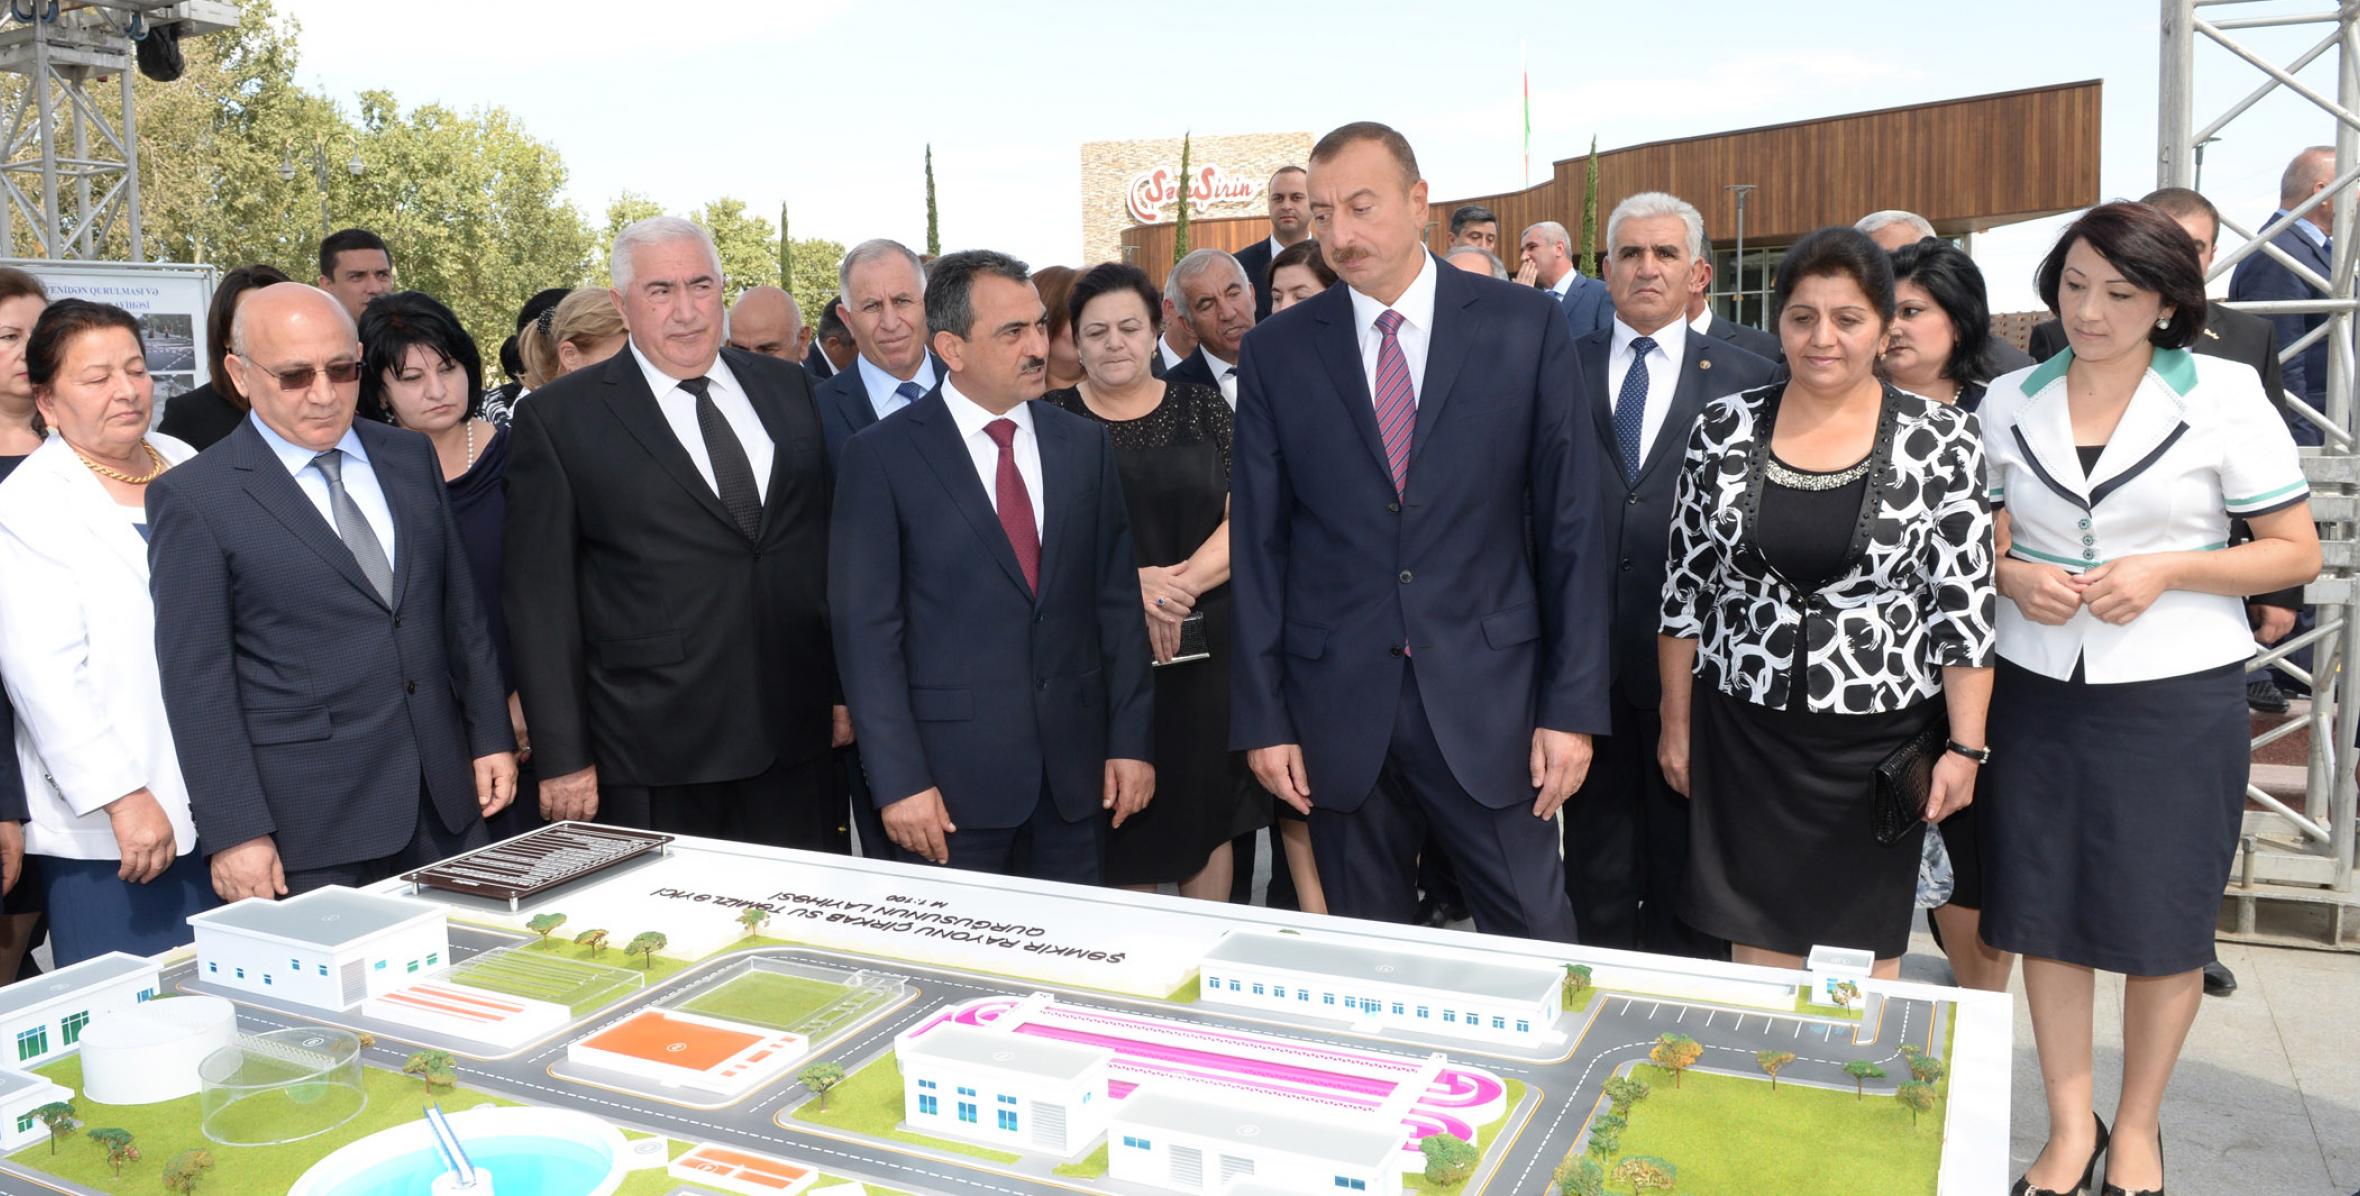 Ilham Aliyev attended the ceremony to mark the supply of drinking water to Shamkir city